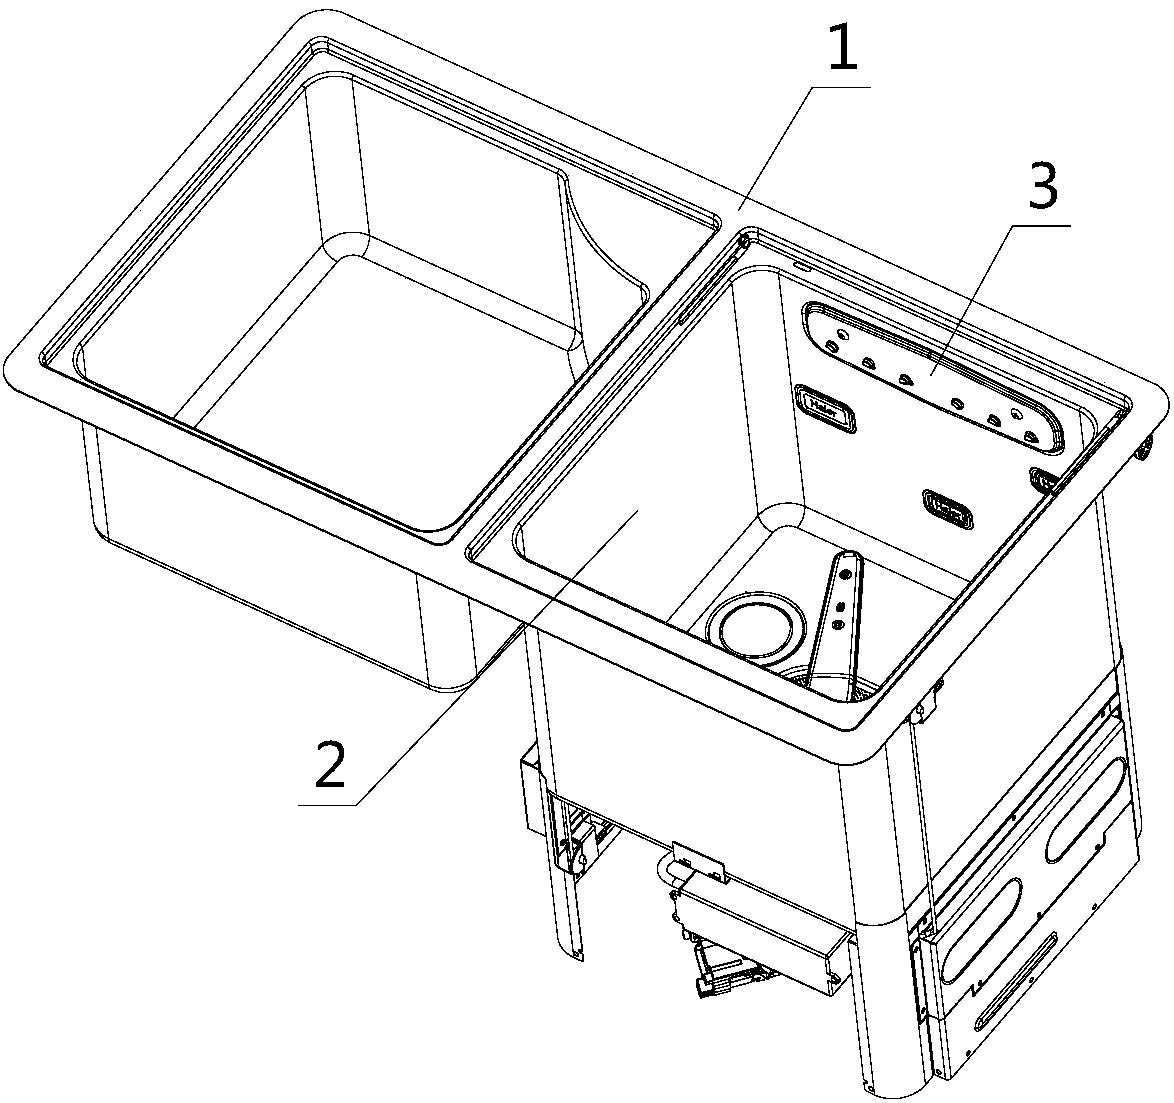 Spray and overflow integrated structure of sink dishwasher